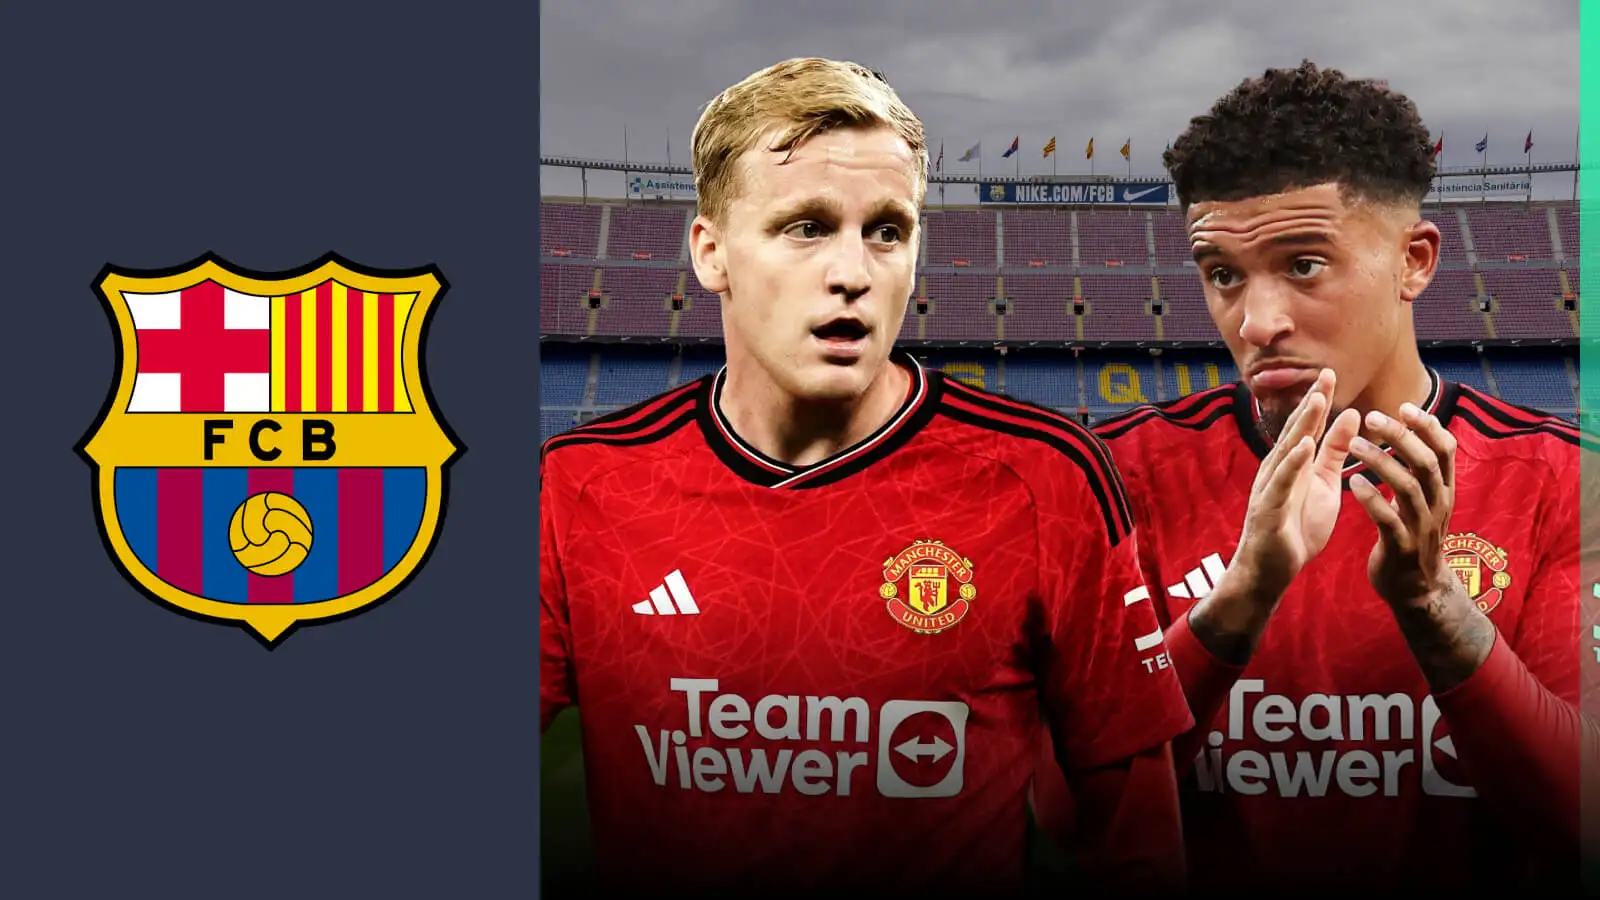 Man Utd hijack their own sale with attempt to offload flop to Barcelona for ‘ridiculous’ fee instead